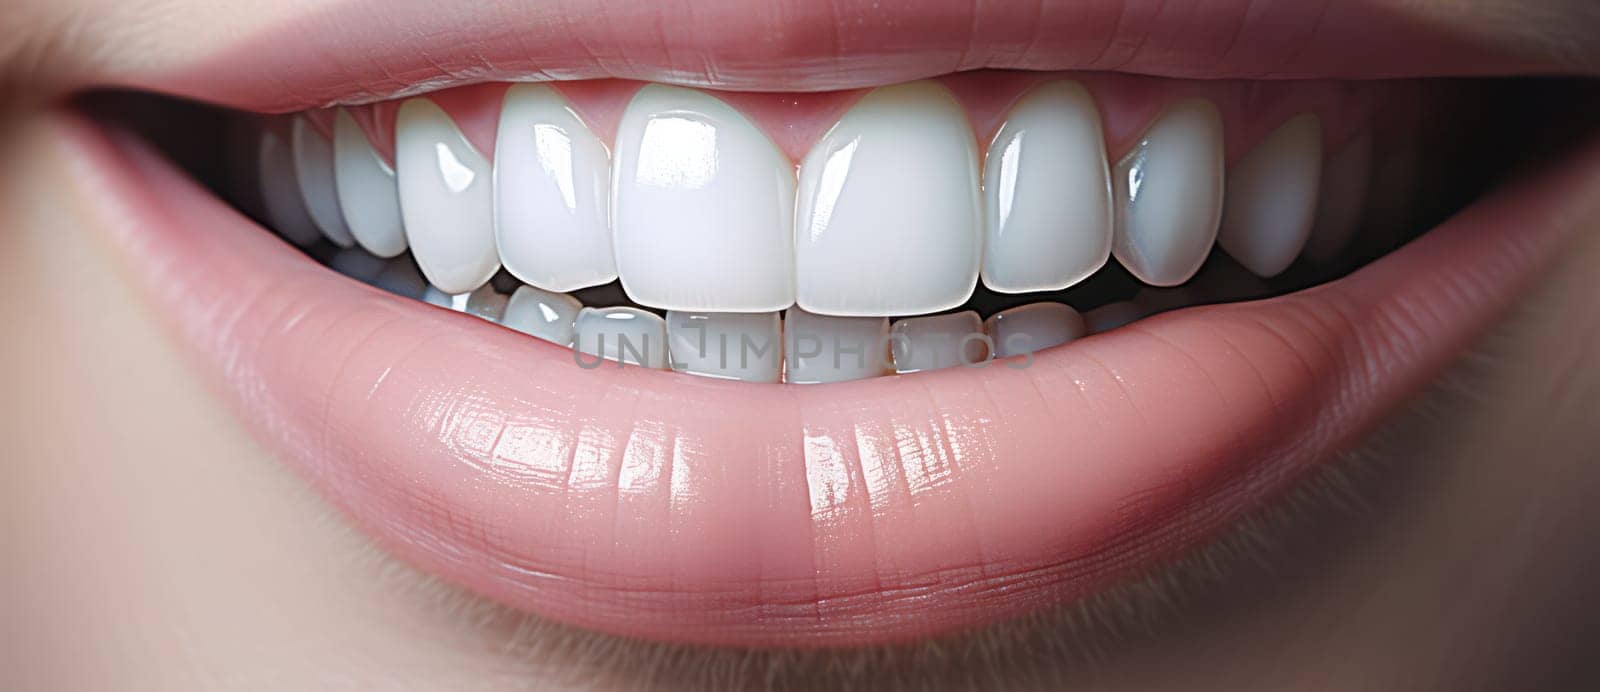 Healthy Dental Care: A Bright, Happy Smile of a Young Woman with Clean White Teeth and Shiny Lips, Close-up by Vichizh